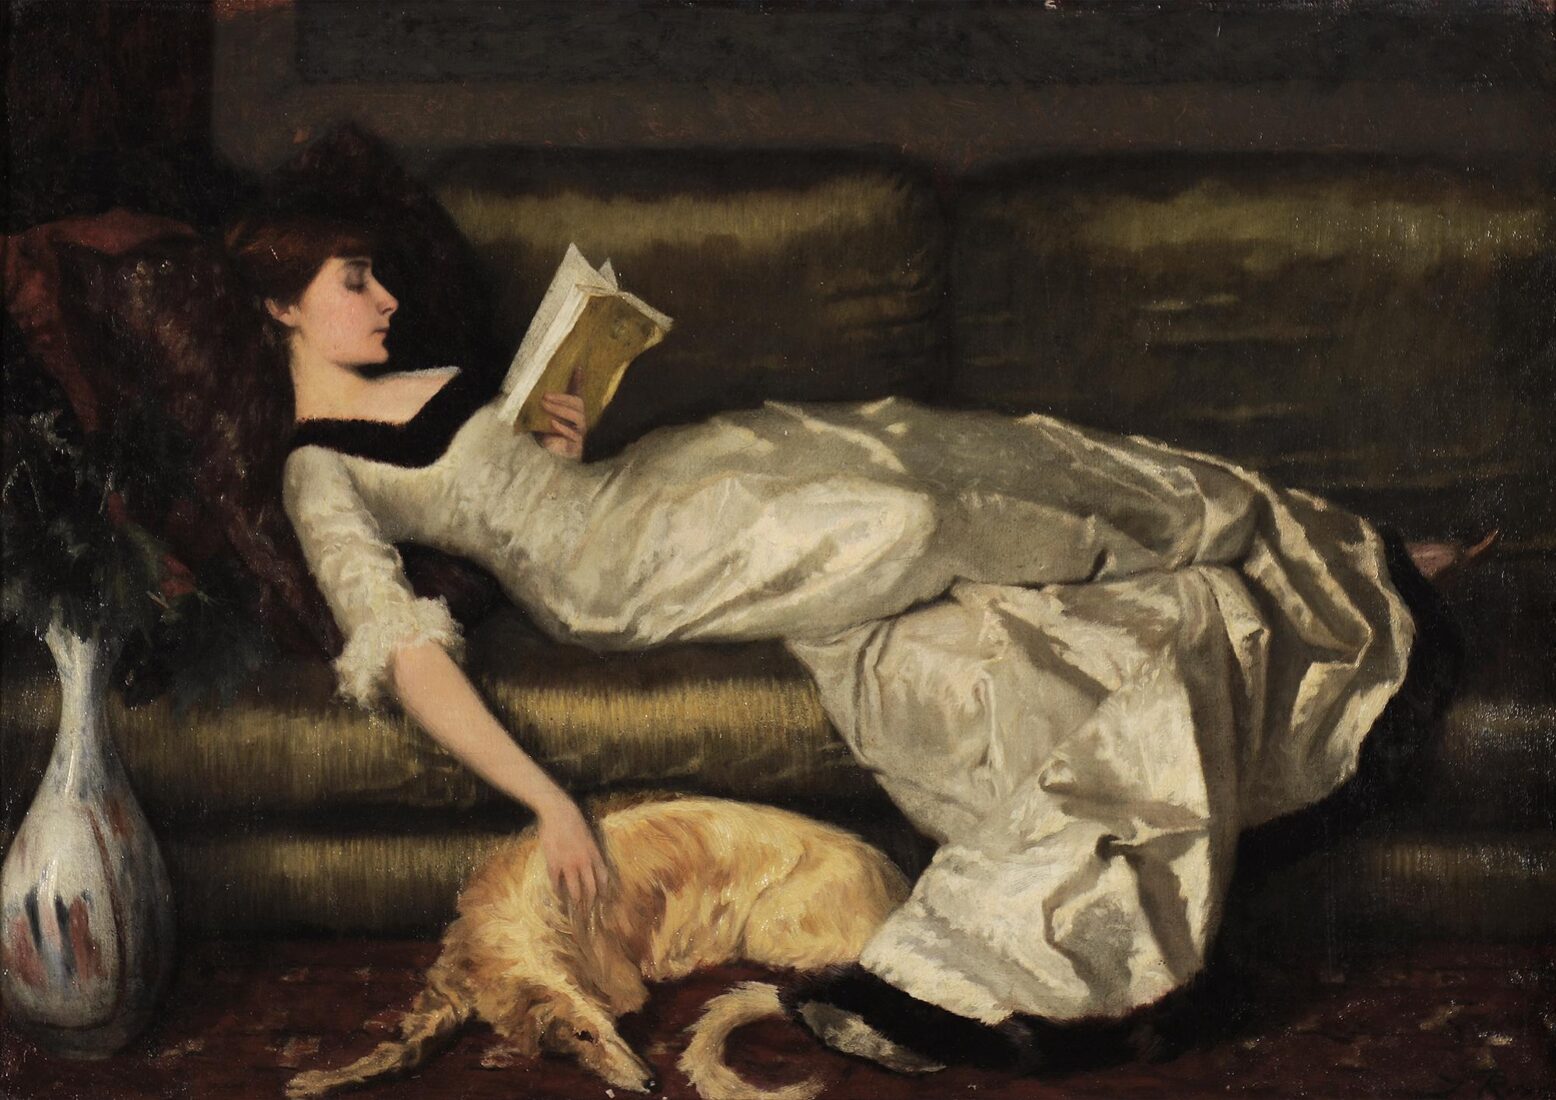 Lady Reclining on Couch - Rizos Ιakovos